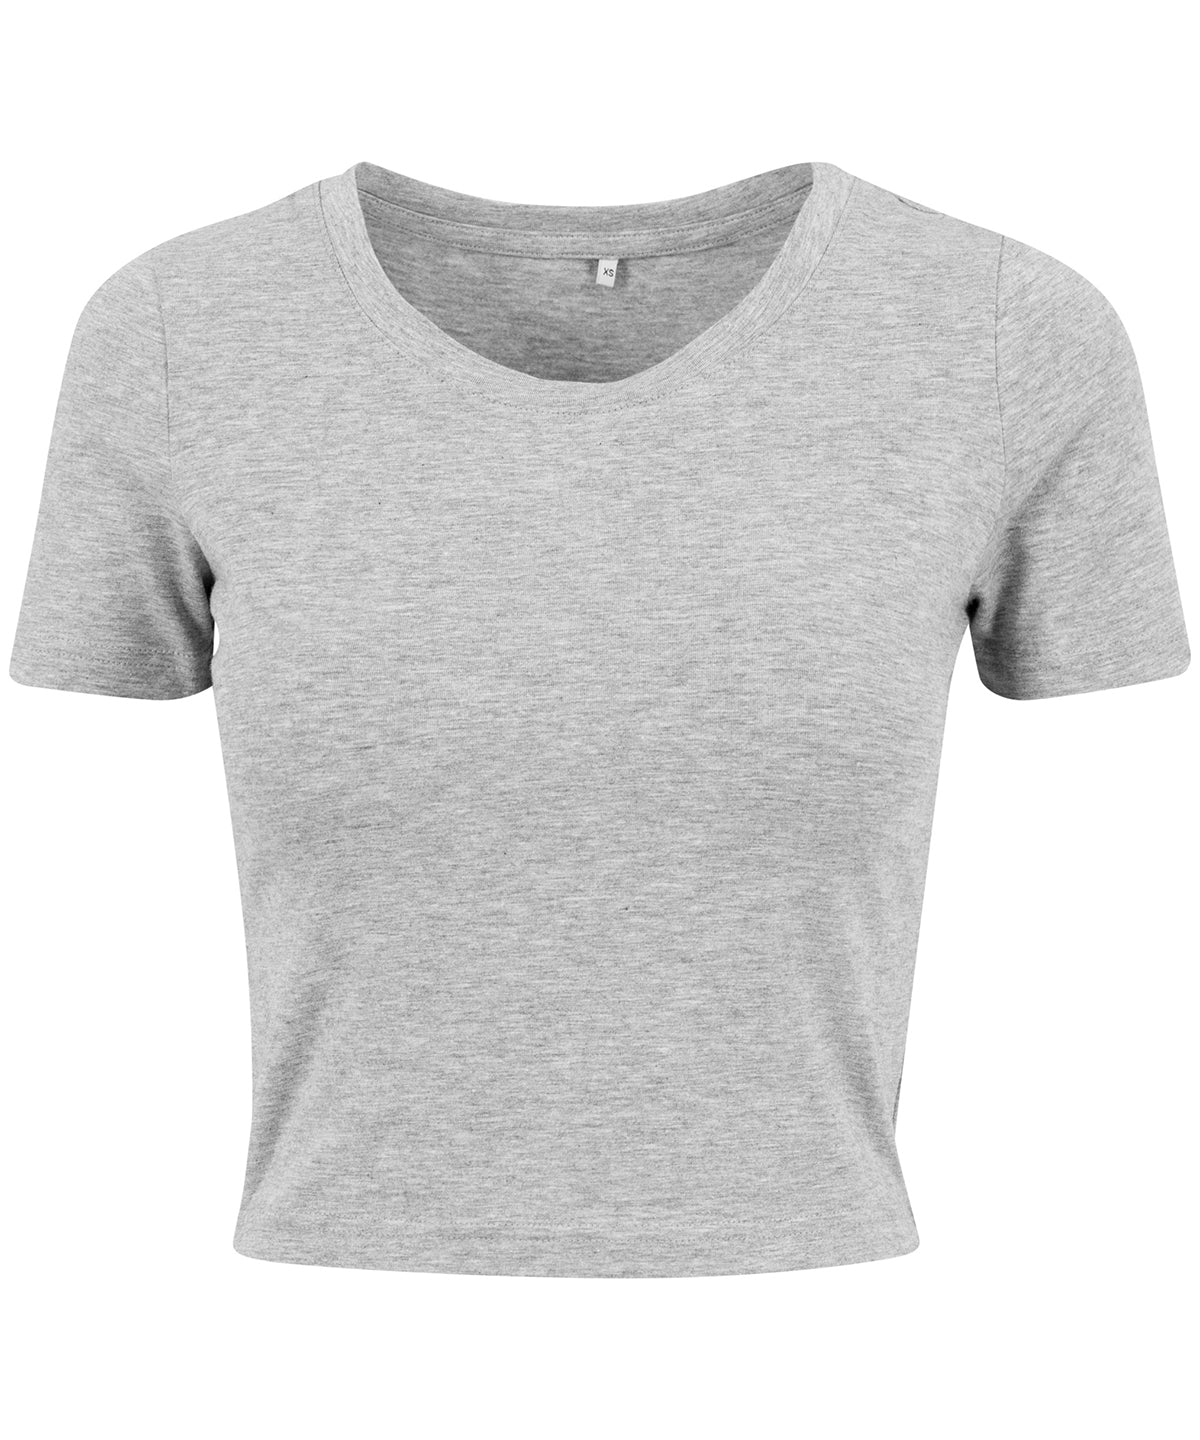 Personalised T-Shirts - Black Build Your Brand Women's cropped tee